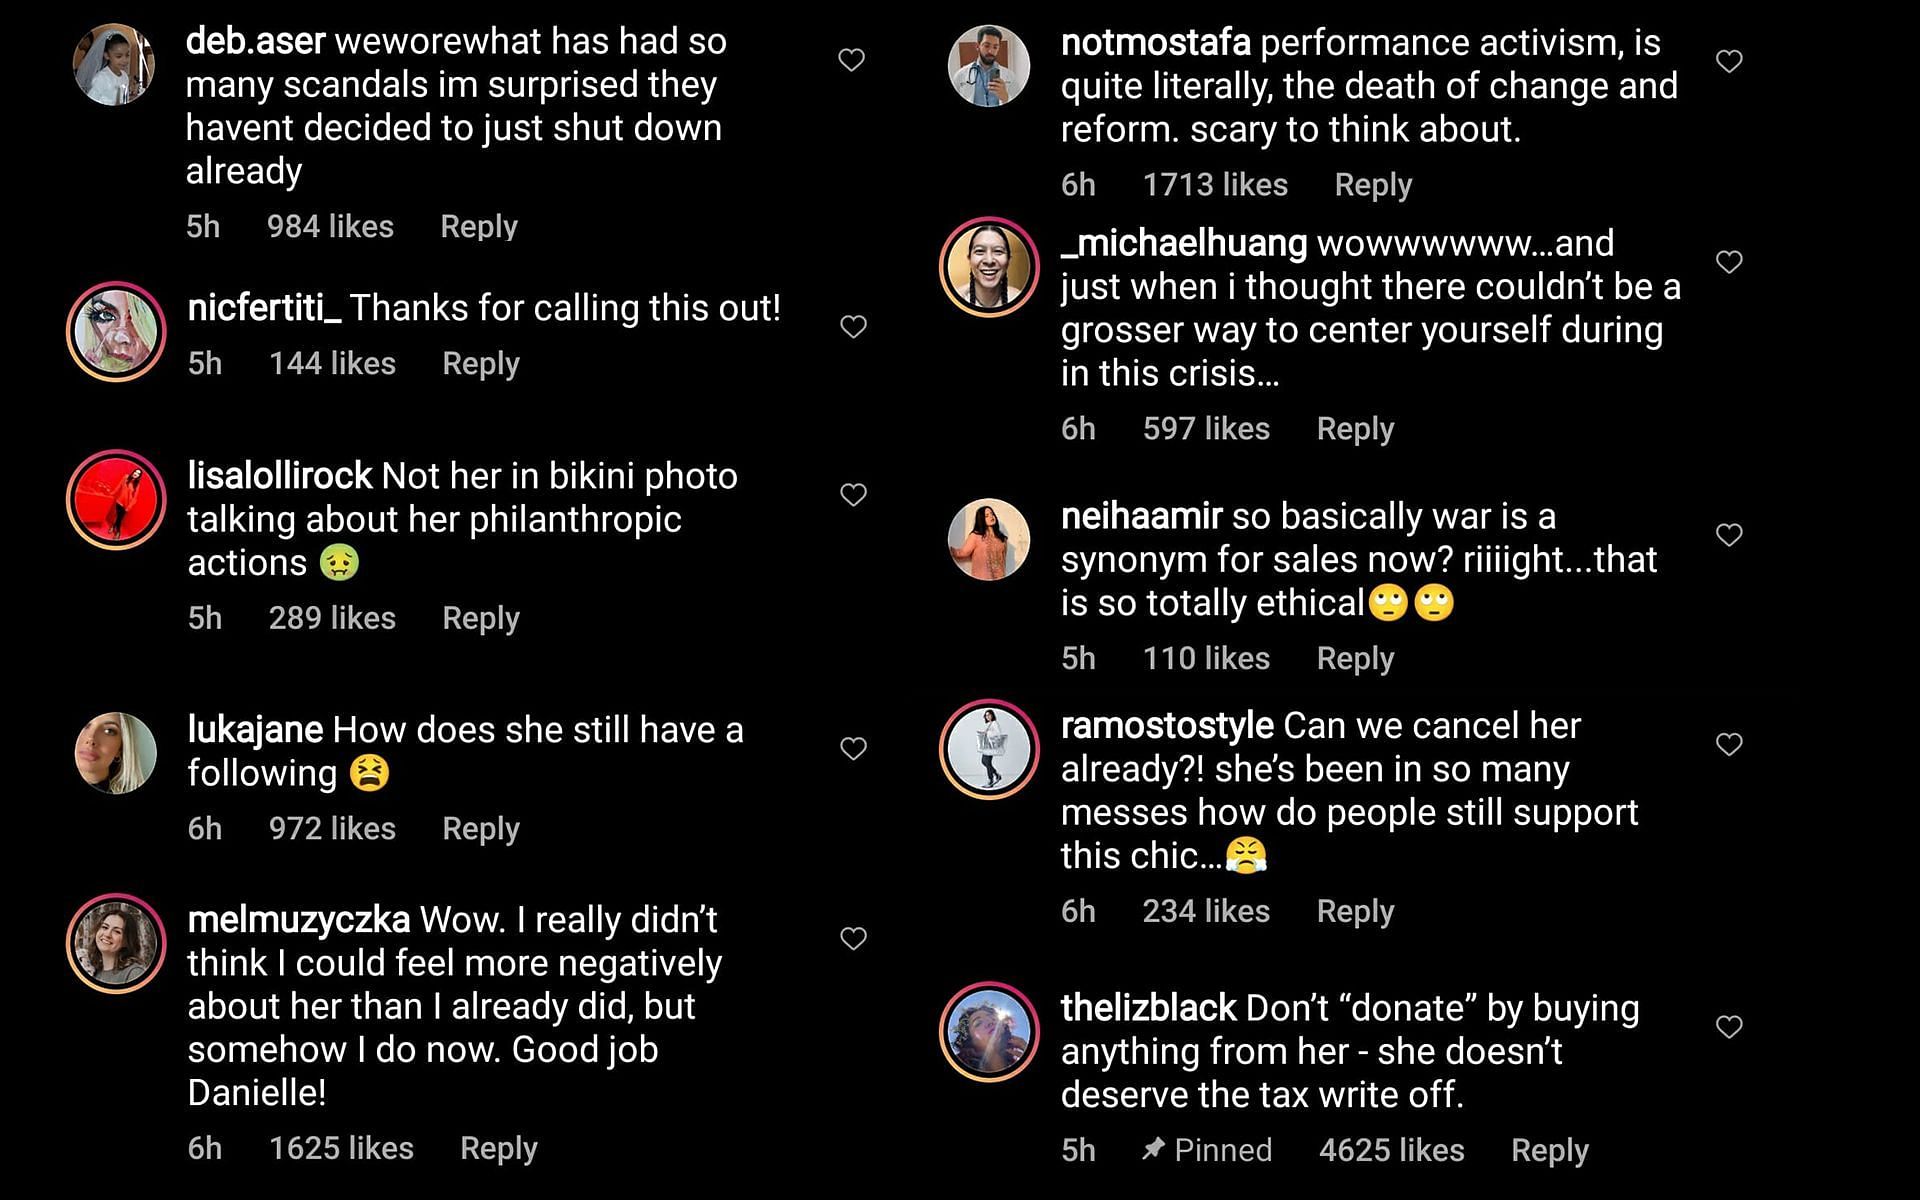 Fans react to the weworewhat post (Image via weworewhat/Instagram)